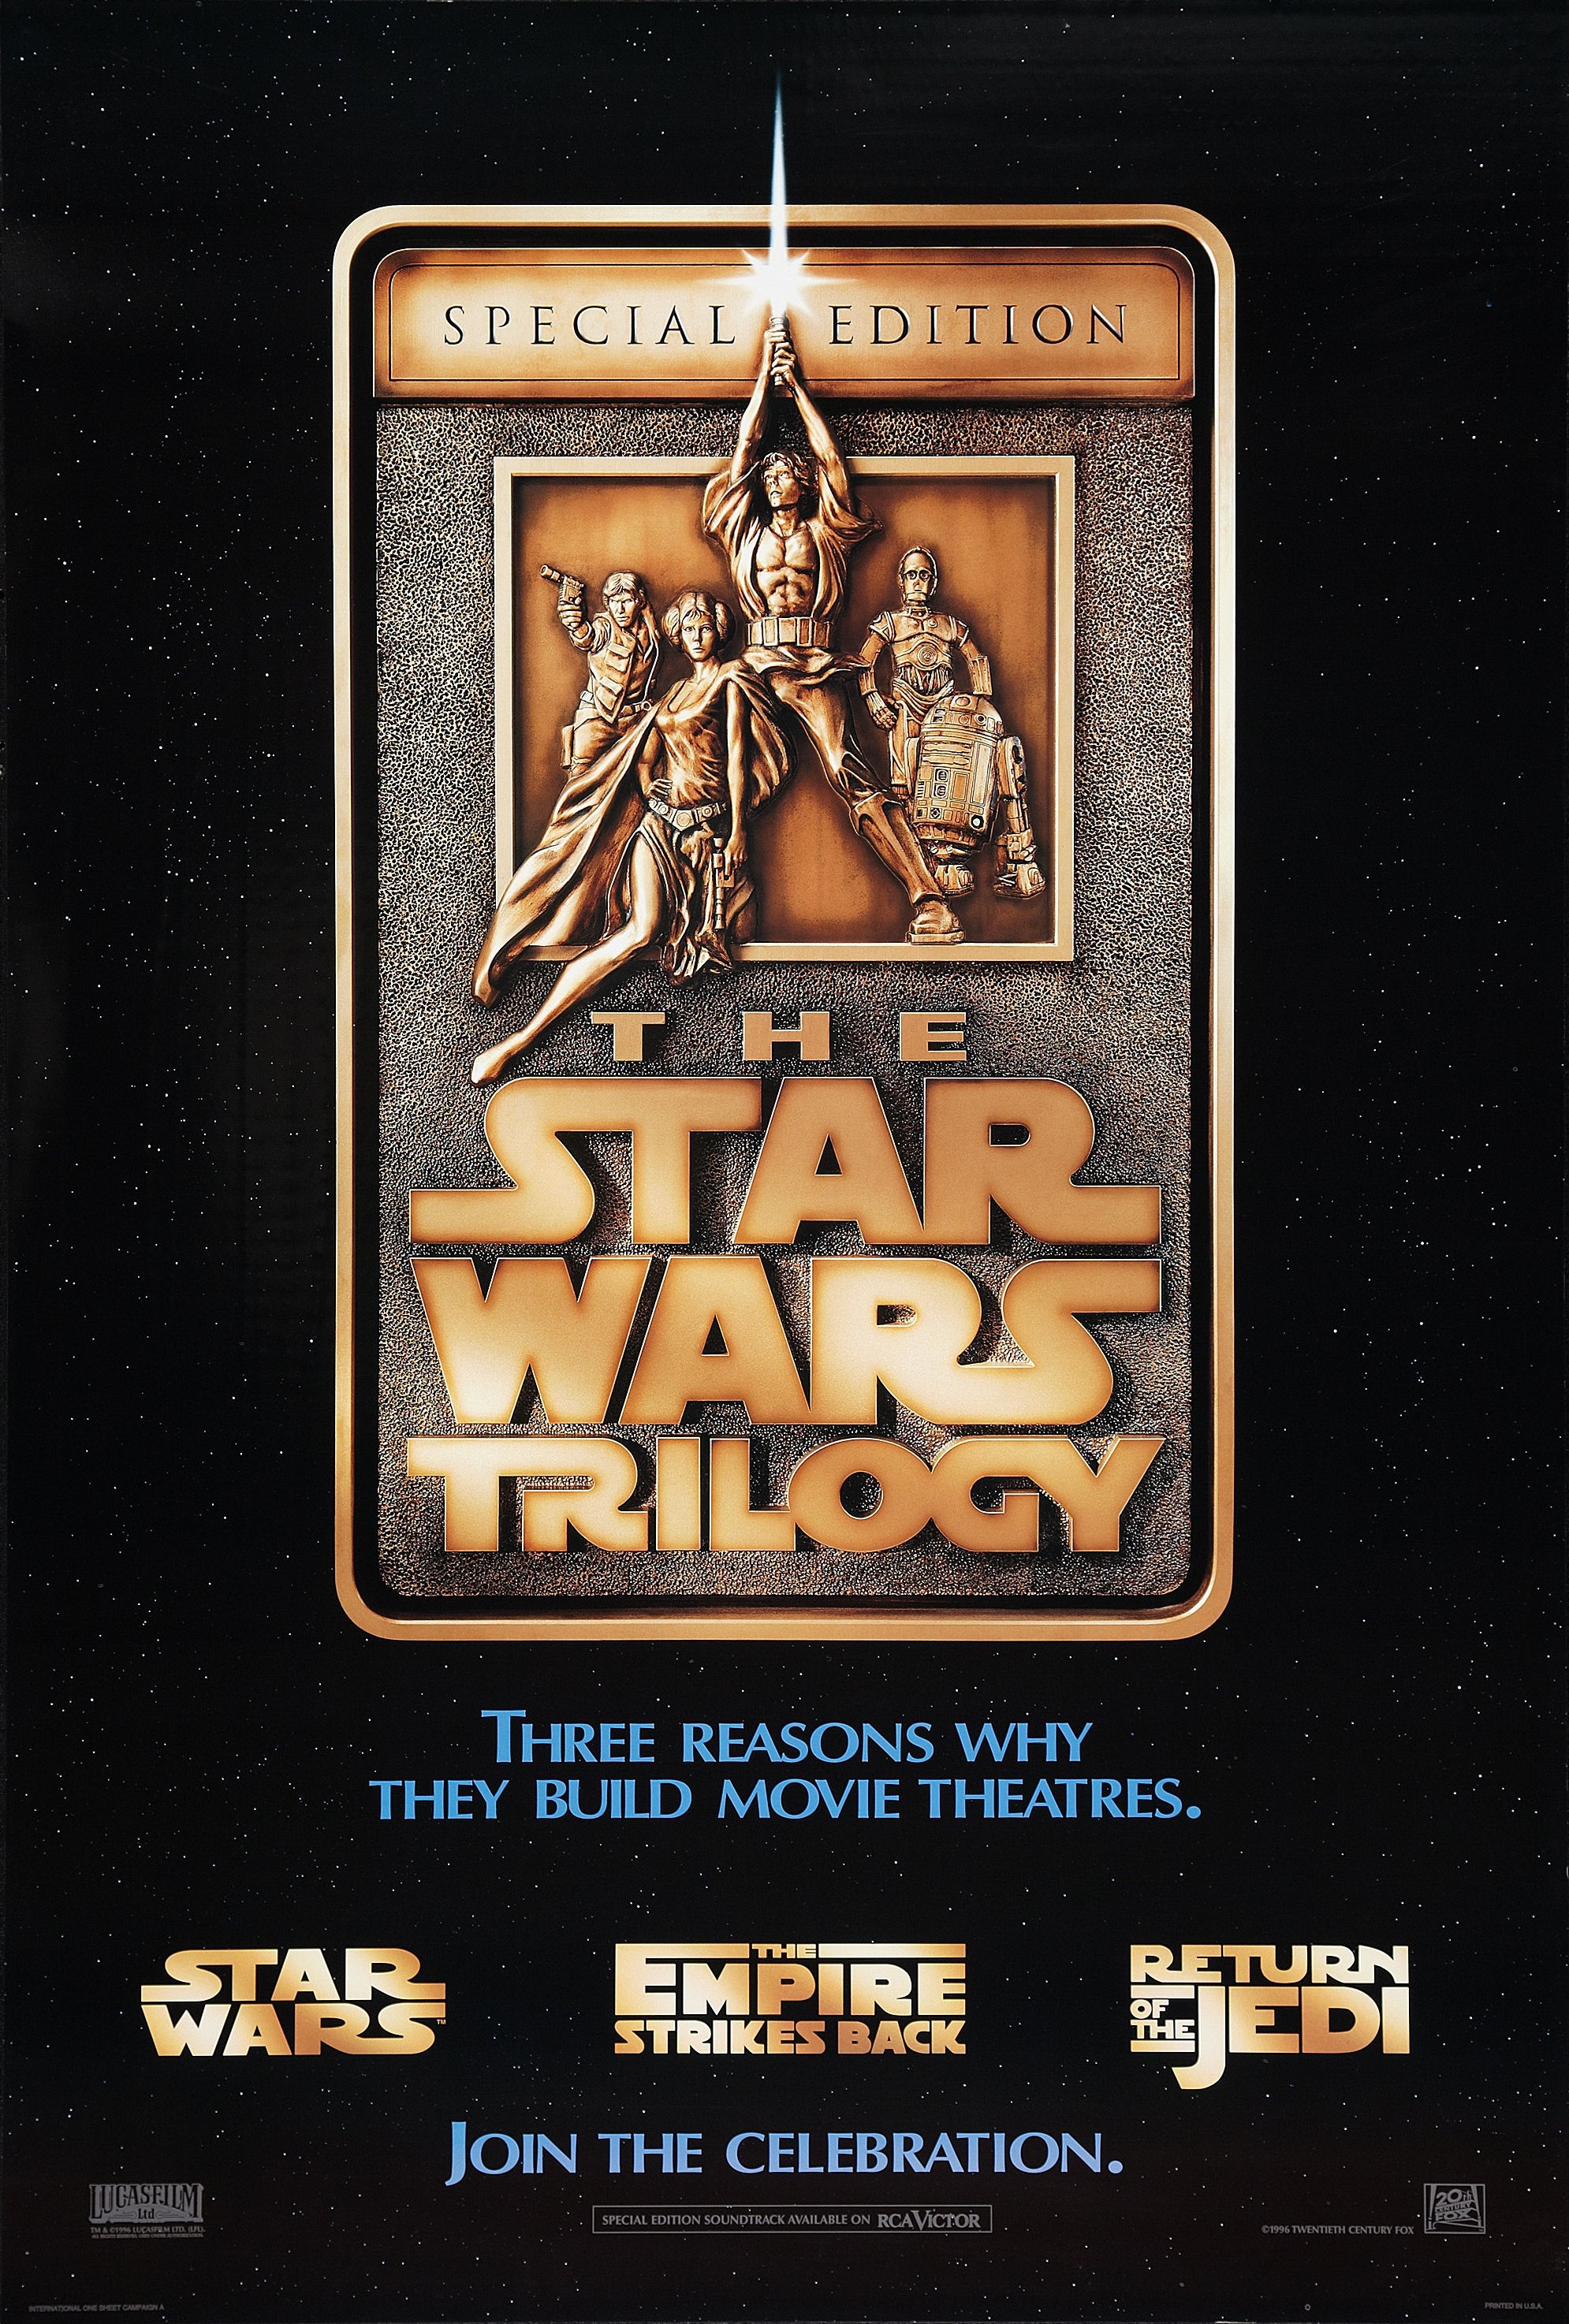 USA, 1997 Heroes Star Wars Official 20th Anniversary Poster Magazine 